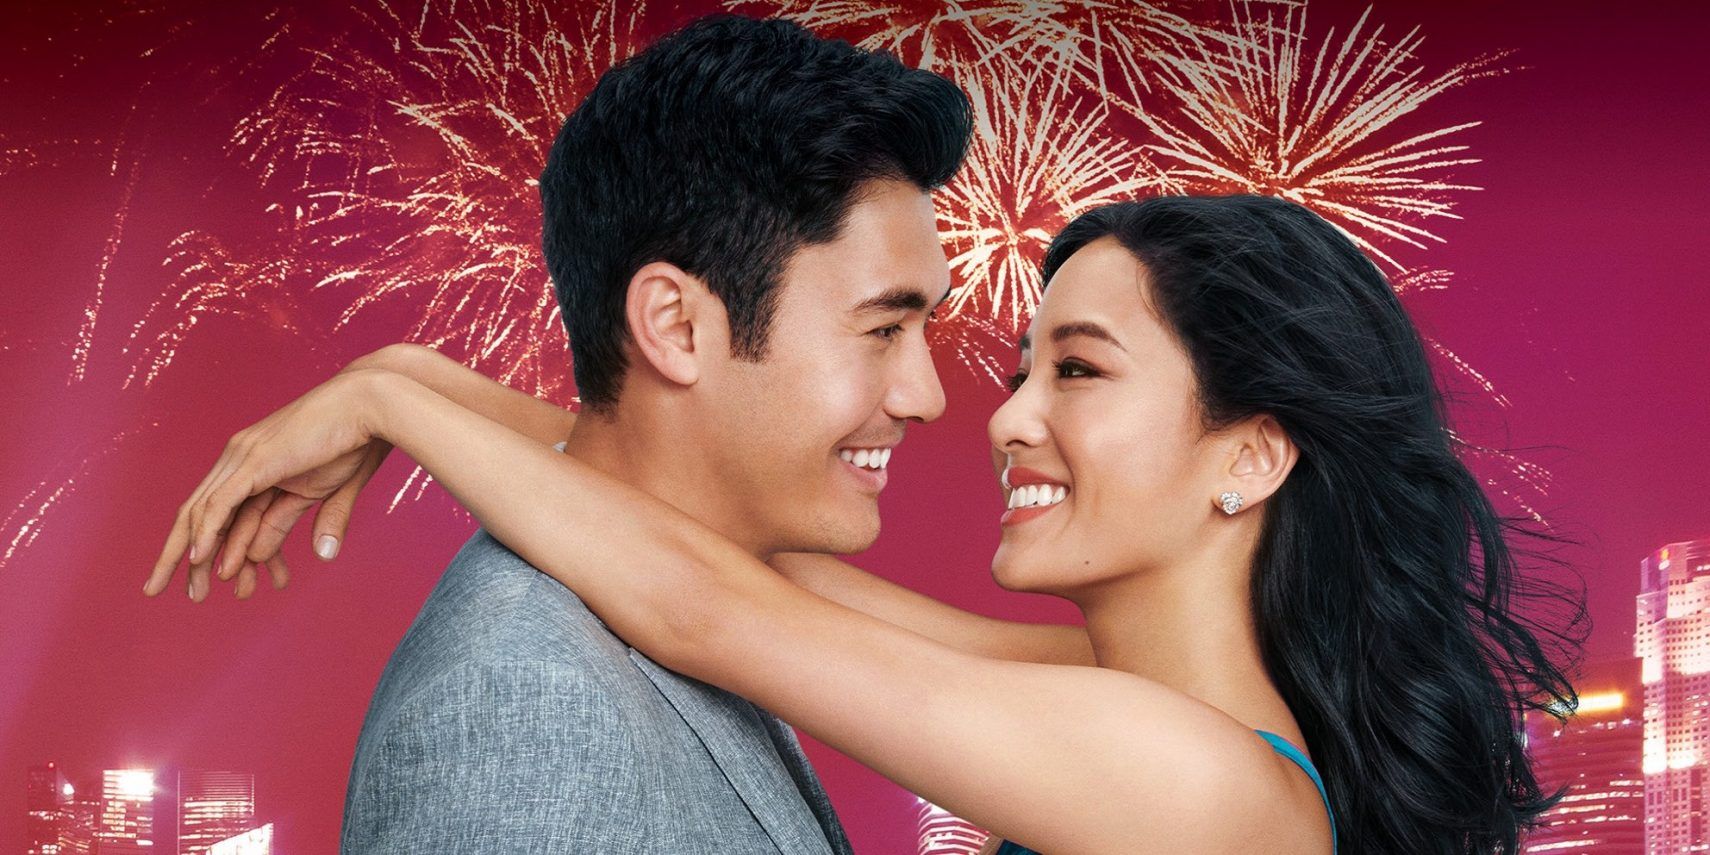 Henry Golding and Constance Wu smiling on the poster for Crazy Rich Asians.